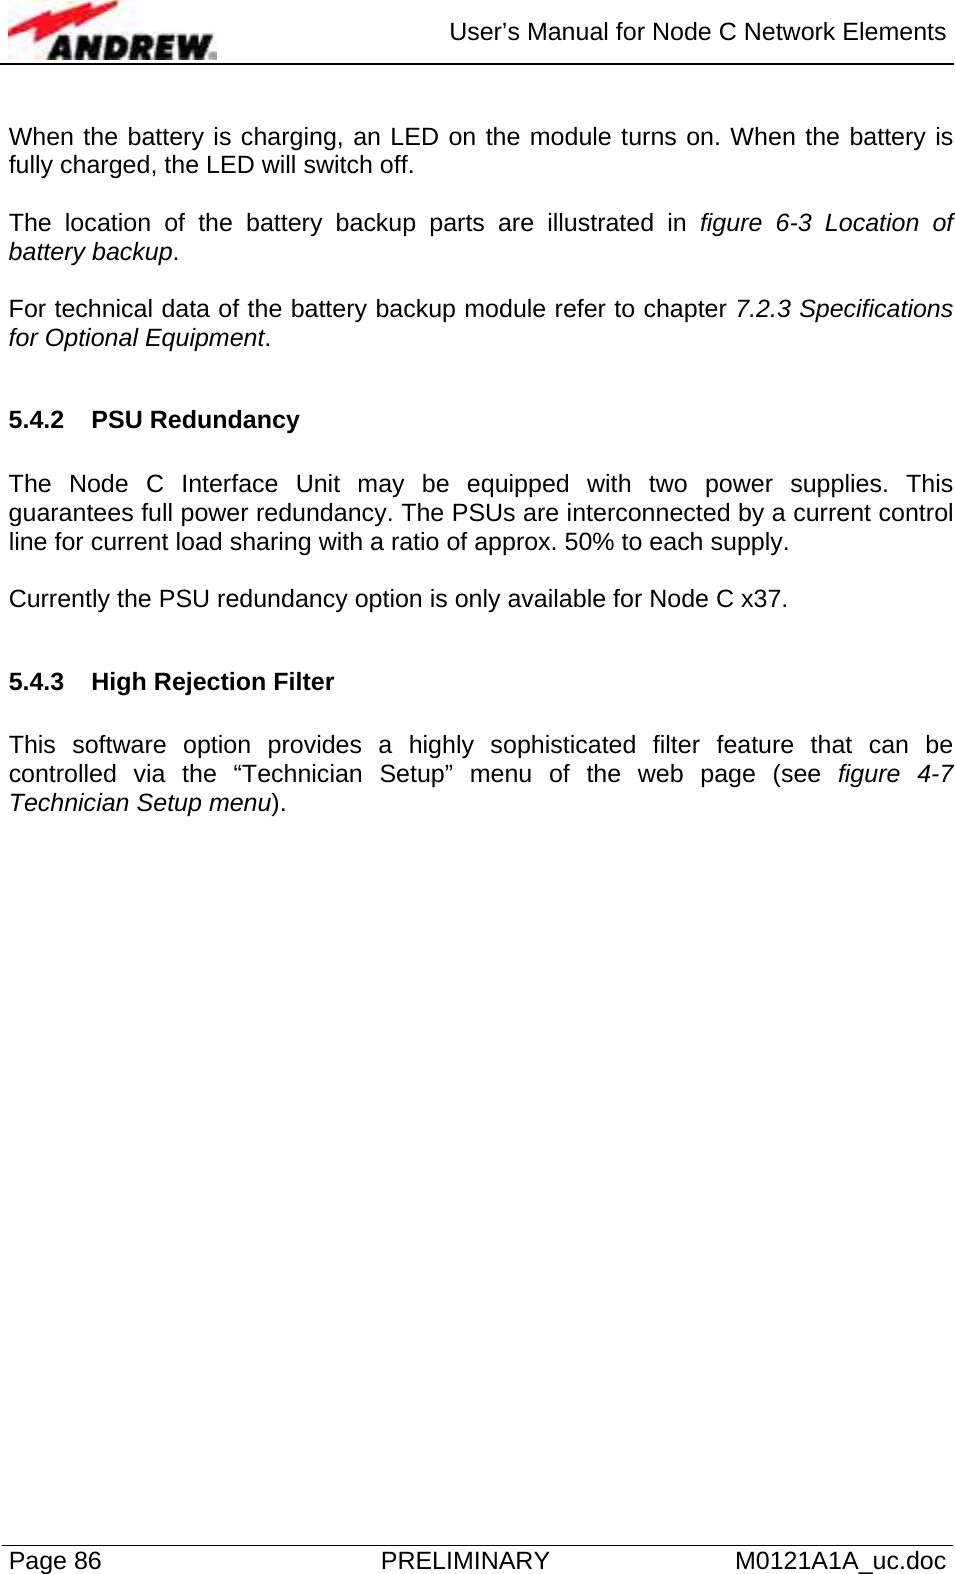  User’s Manual for Node C Network Elements Page 86  PRELIMINARY M0121A1A_uc.doc  When the battery is charging, an LED on the module turns on. When the battery is fully charged, the LED will switch off.  The location of the battery backup parts are illustrated in figure 6-3 Location of battery backup.   For technical data of the battery backup module refer to chapter 7.2.3 Specifications for Optional Equipment.  5.4.2 PSU Redundancy  The Node C Interface Unit may be equipped with two power supplies. This guarantees full power redundancy. The PSUs are interconnected by a current control line for current load sharing with a ratio of approx. 50% to each supply.  Currently the PSU redundancy option is only available for Node C x37.  5.4.3  High Rejection Filter  This software option provides a highly sophisticated filter feature that can be controlled via the “Technician Setup” menu of the web page (see figure 4-7 Technician Setup menu).    